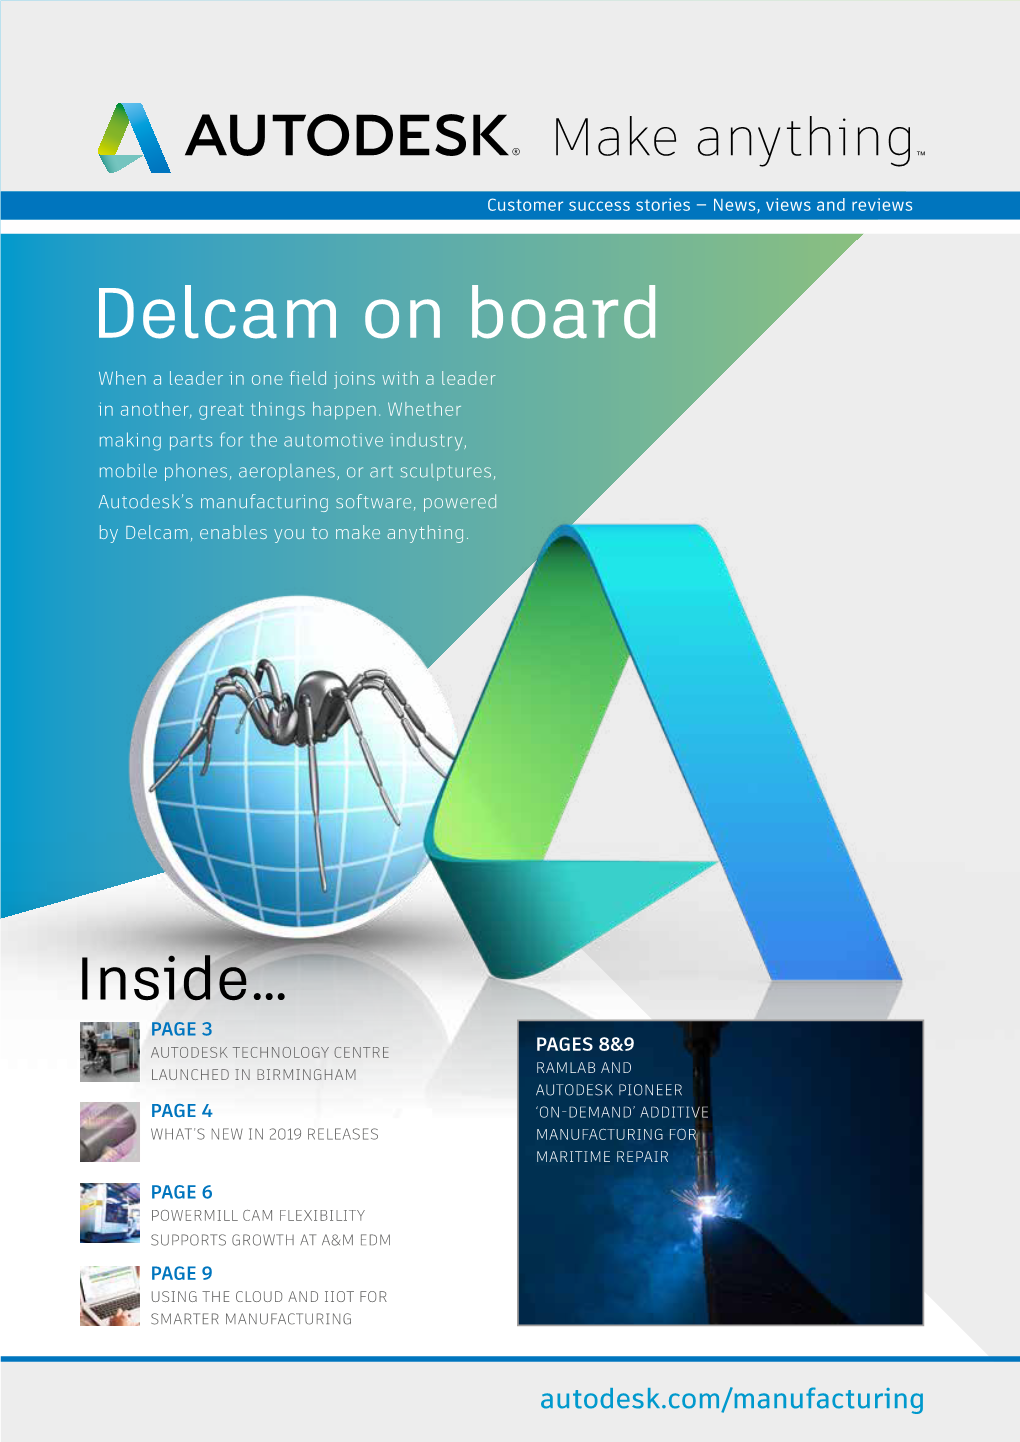 Delcam on Board When a Leader in One Field Joins with a Leader in Another, Great Things Happen